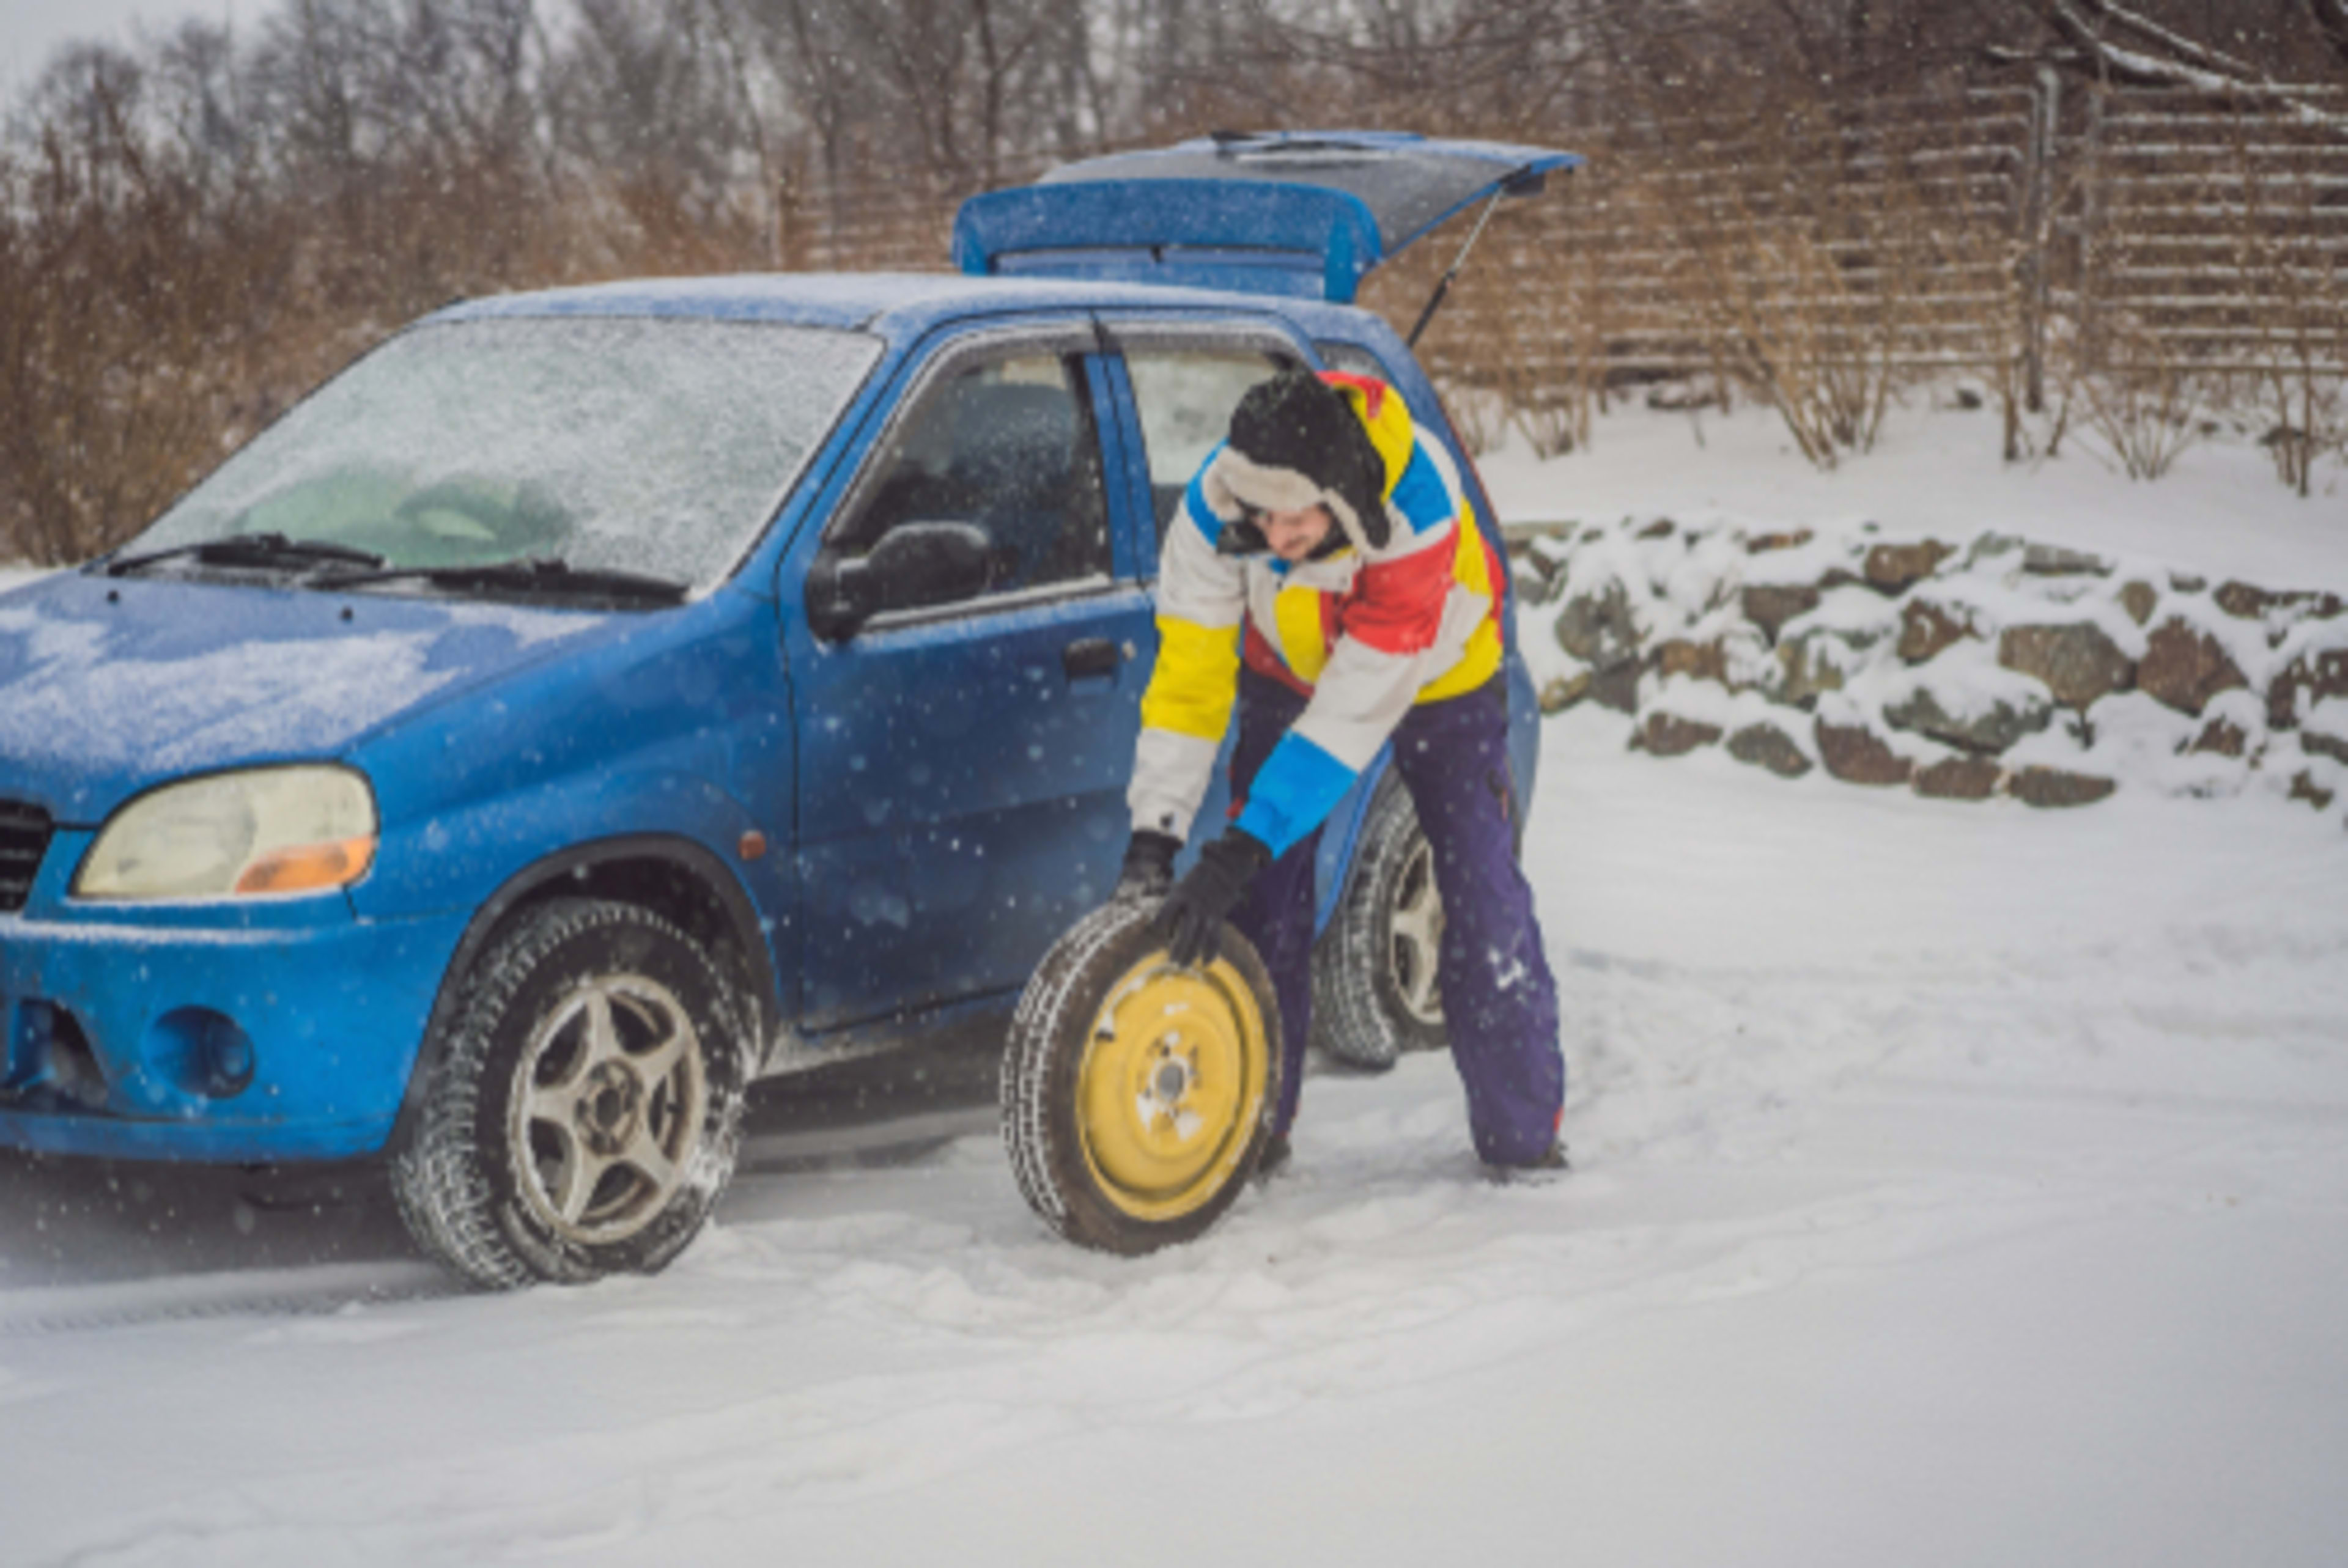 Rolling a car's spare tire up to the flat tire to change it out, while it snows.